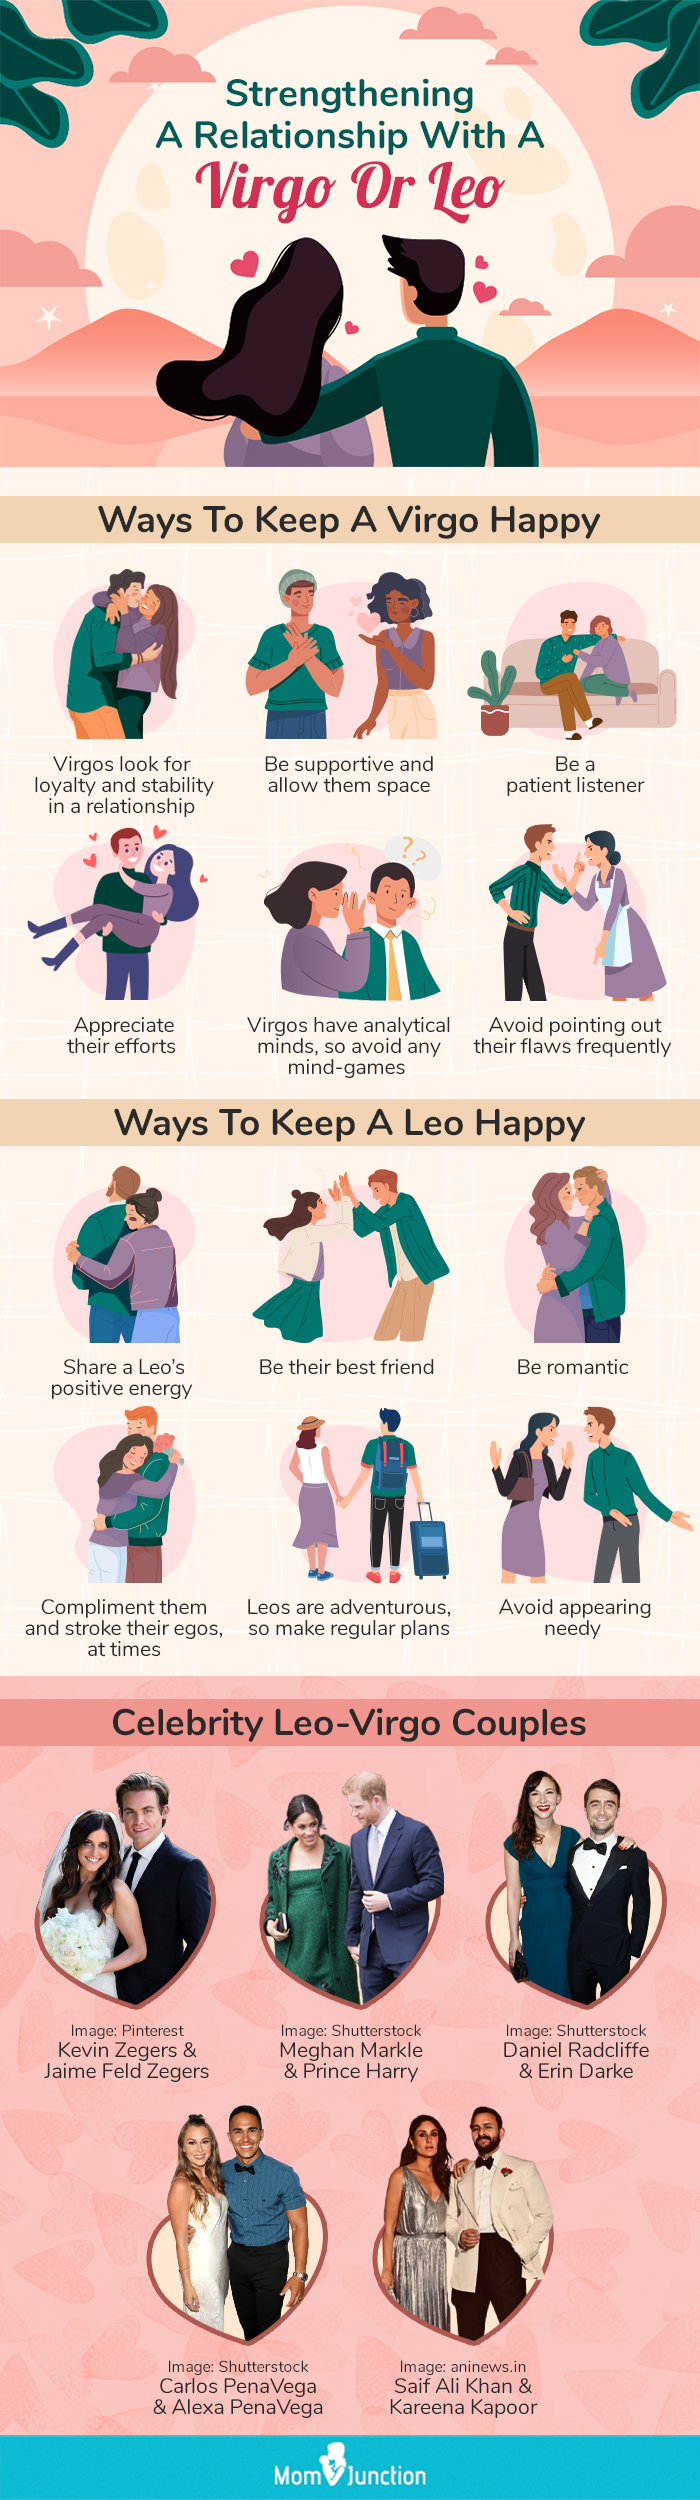 strengthening a relationship with a virgo or leo (infographic)